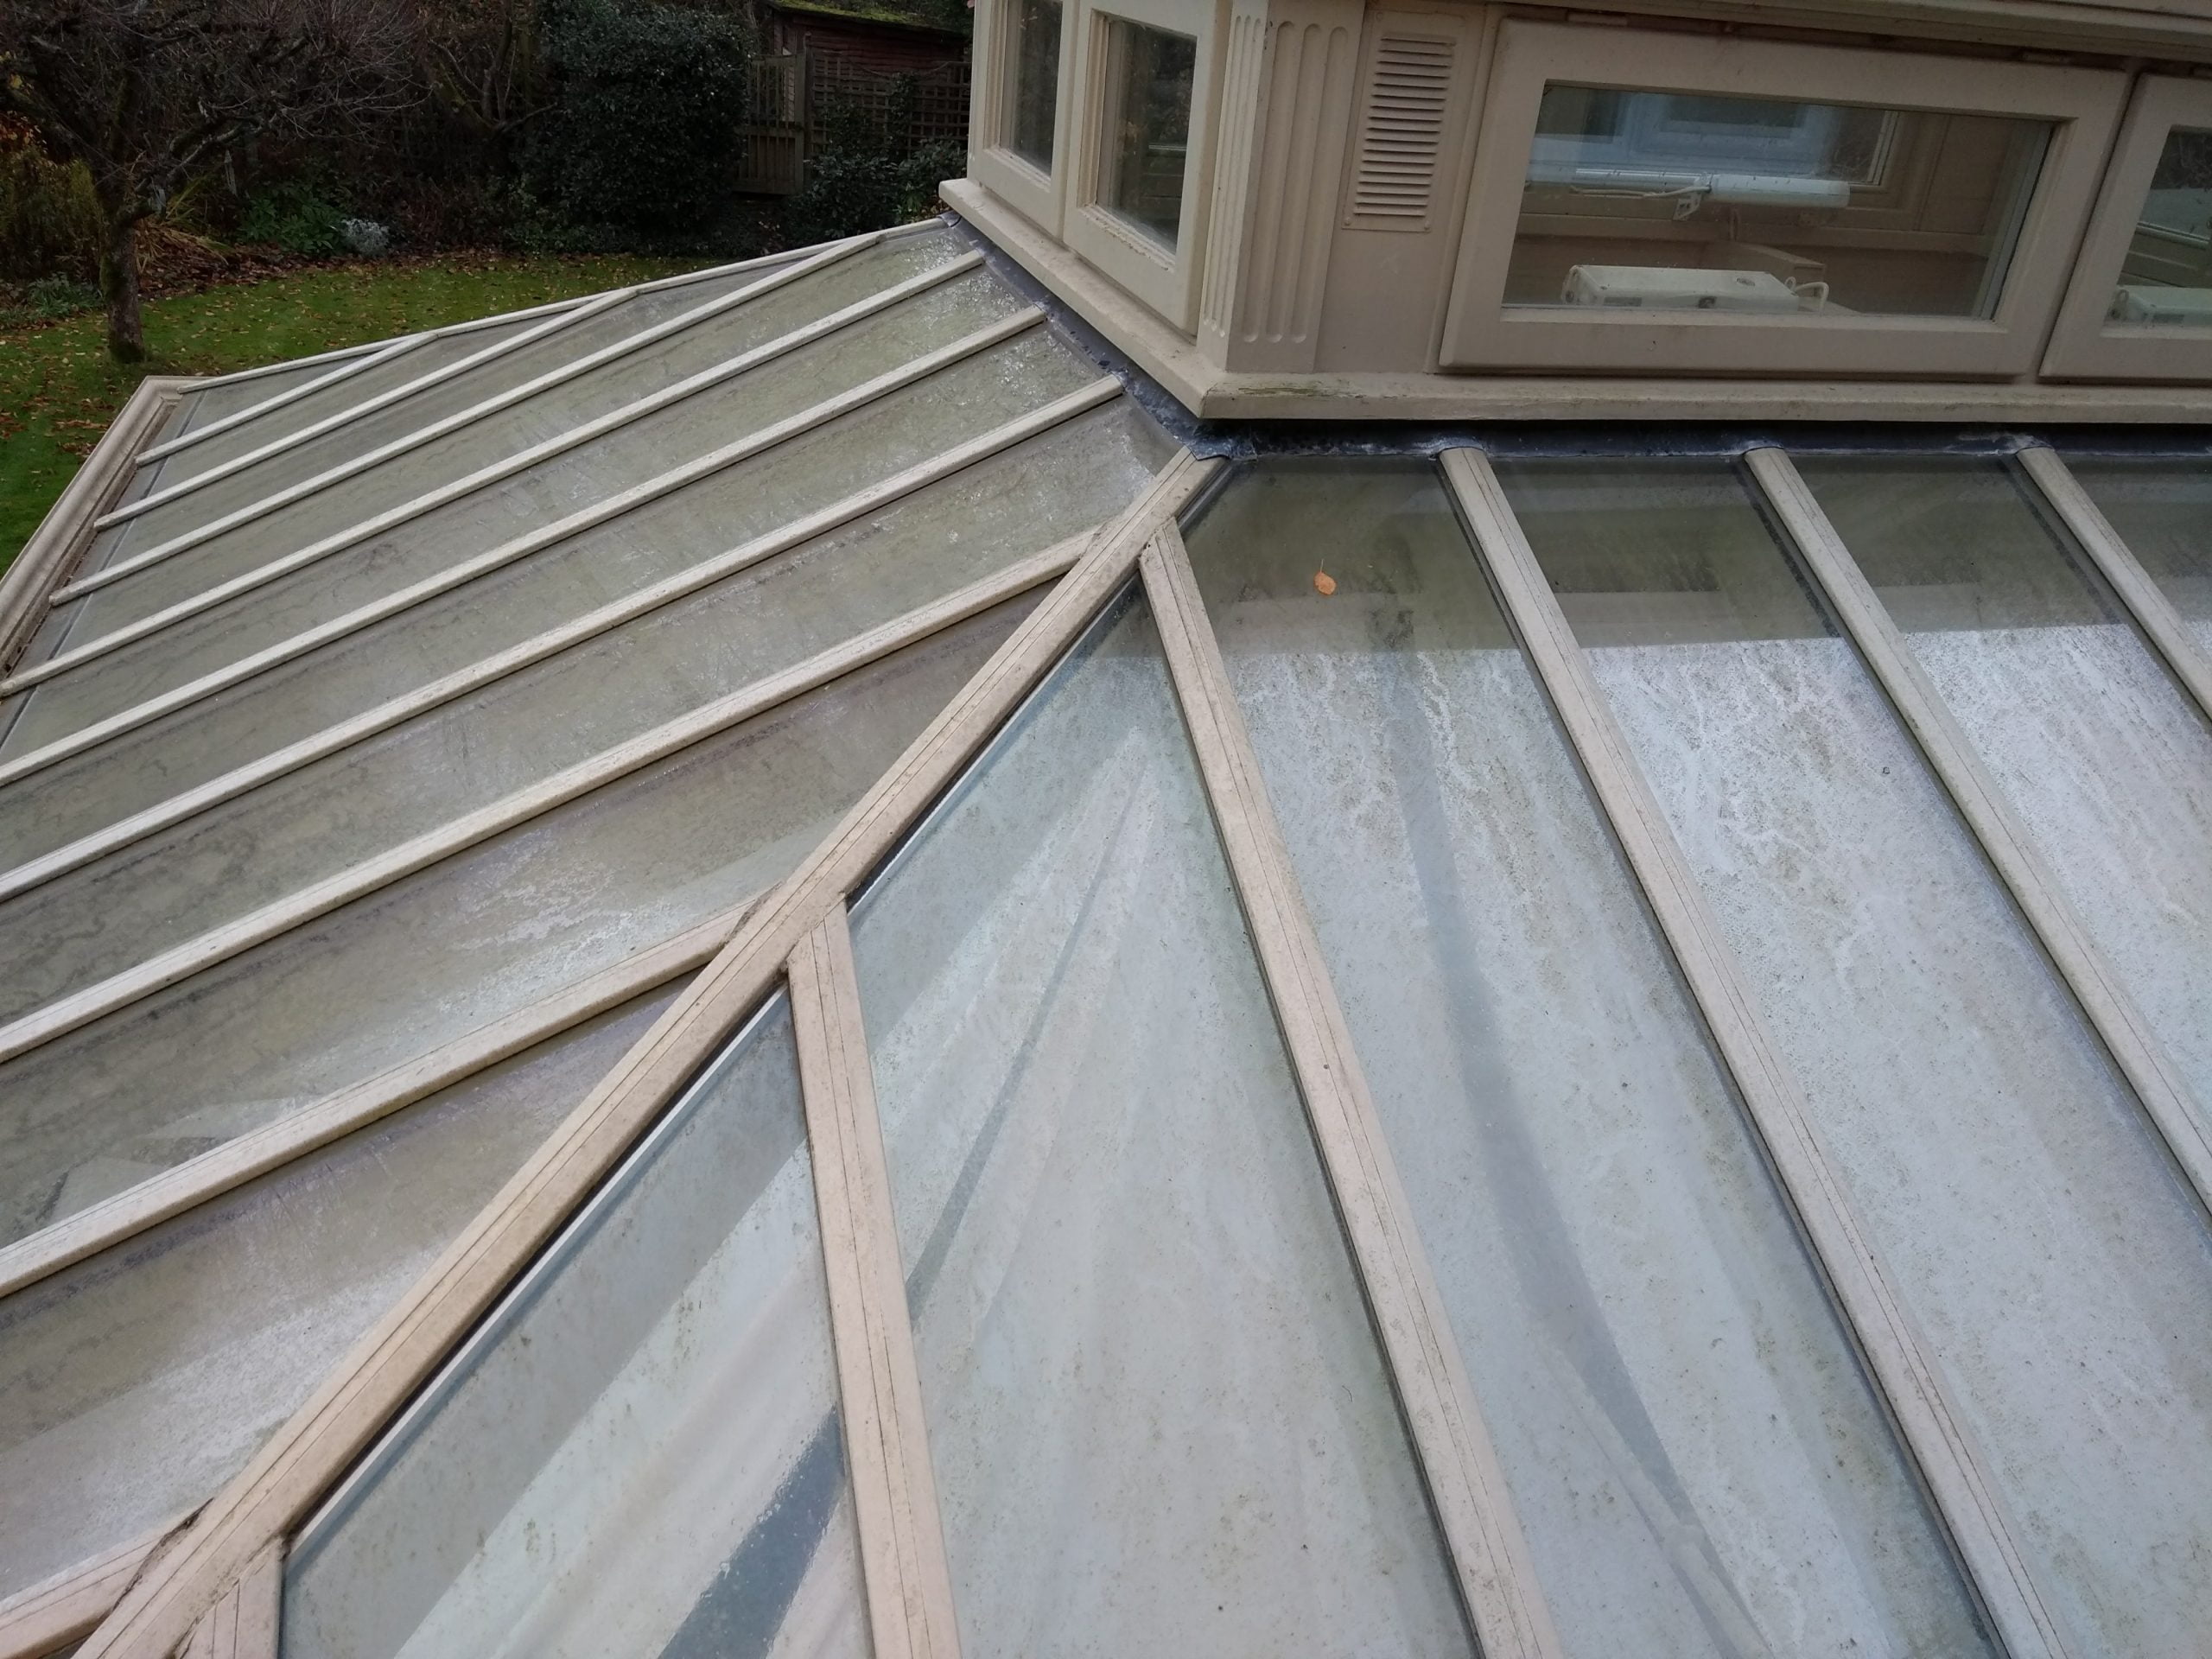 Conservatory roof before being cleaned